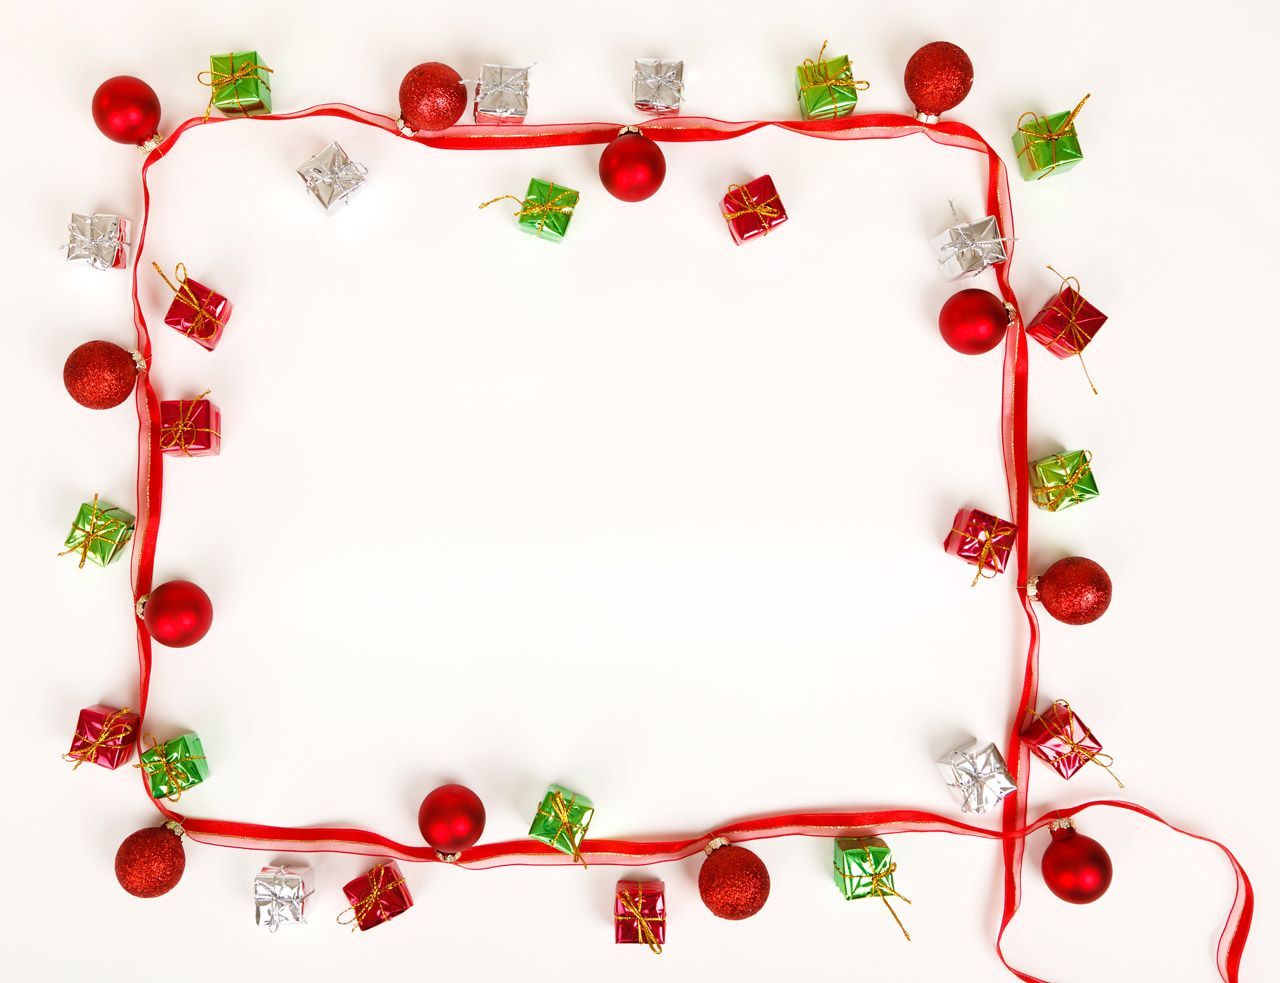 Powerpoint Background: March 2012. Christmas frames free, Christmas frames, Christmas border